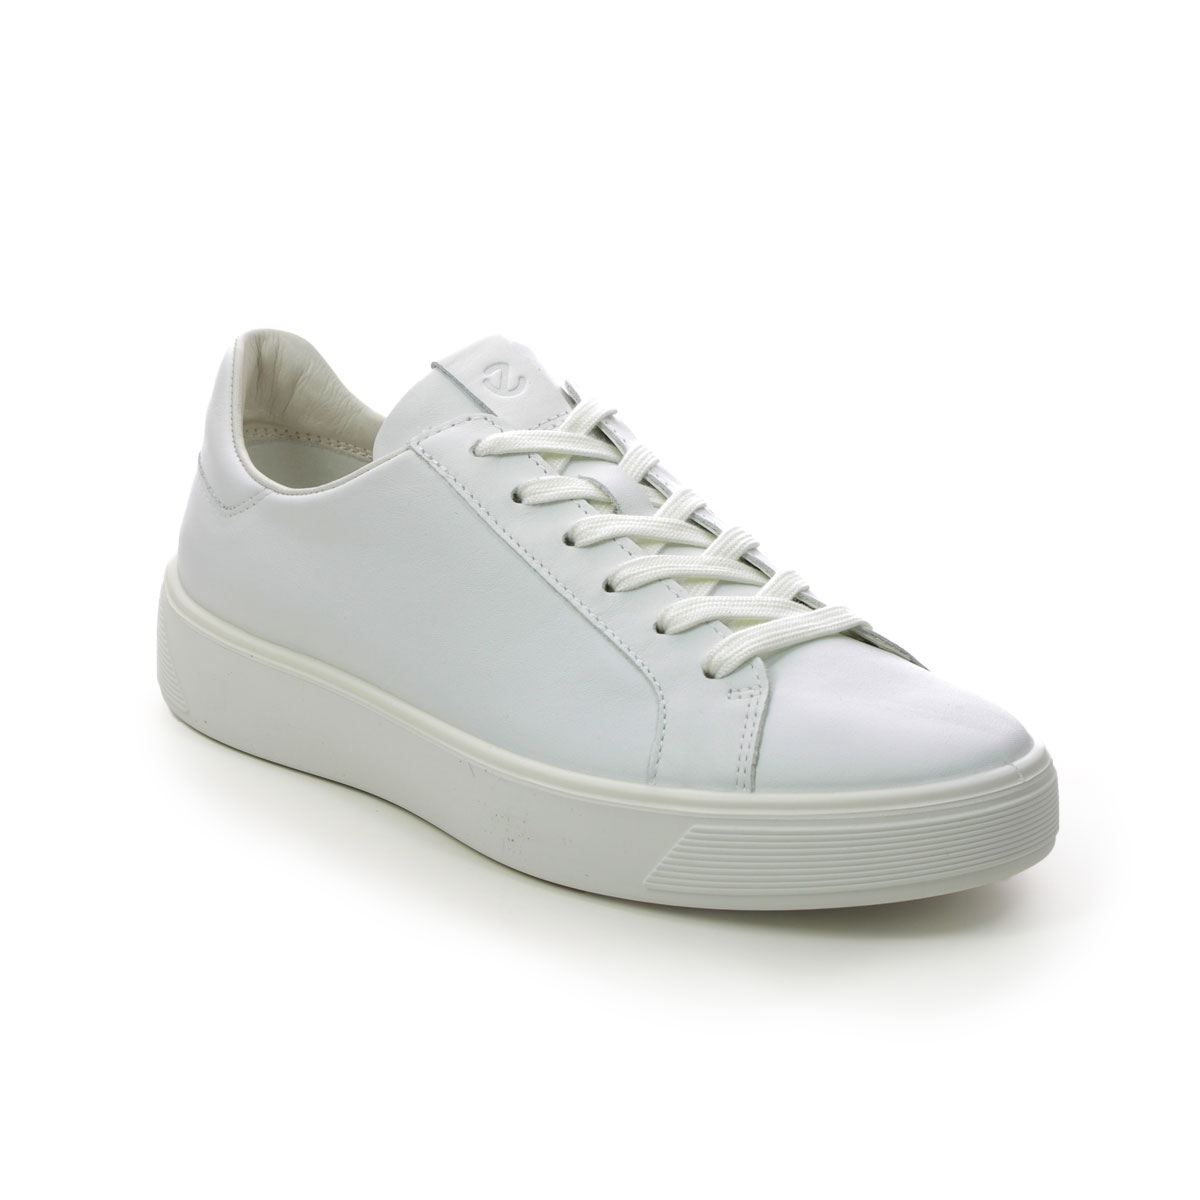 Ecco Street Tray W White Leather Womens Trainers 291143-01007 In Size 37 In Plain White Leather